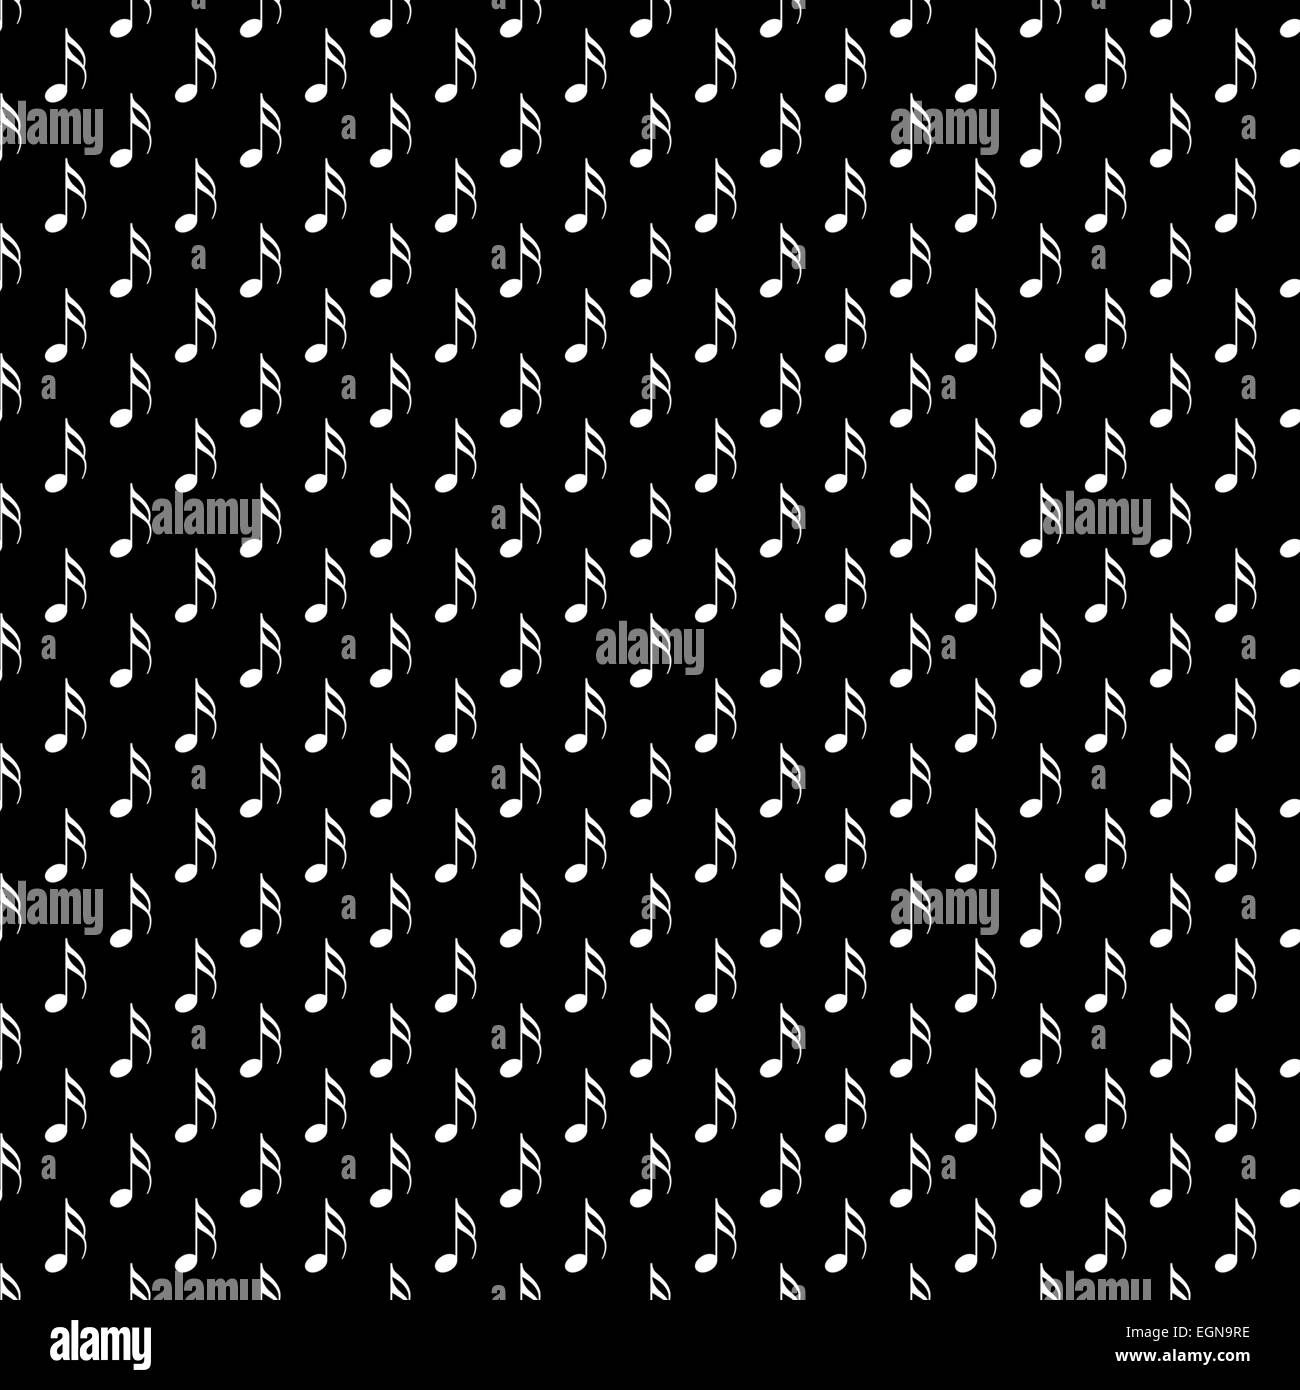 Black and White Musical Notes Polka Dots Background Pattern Texture Stock Photo